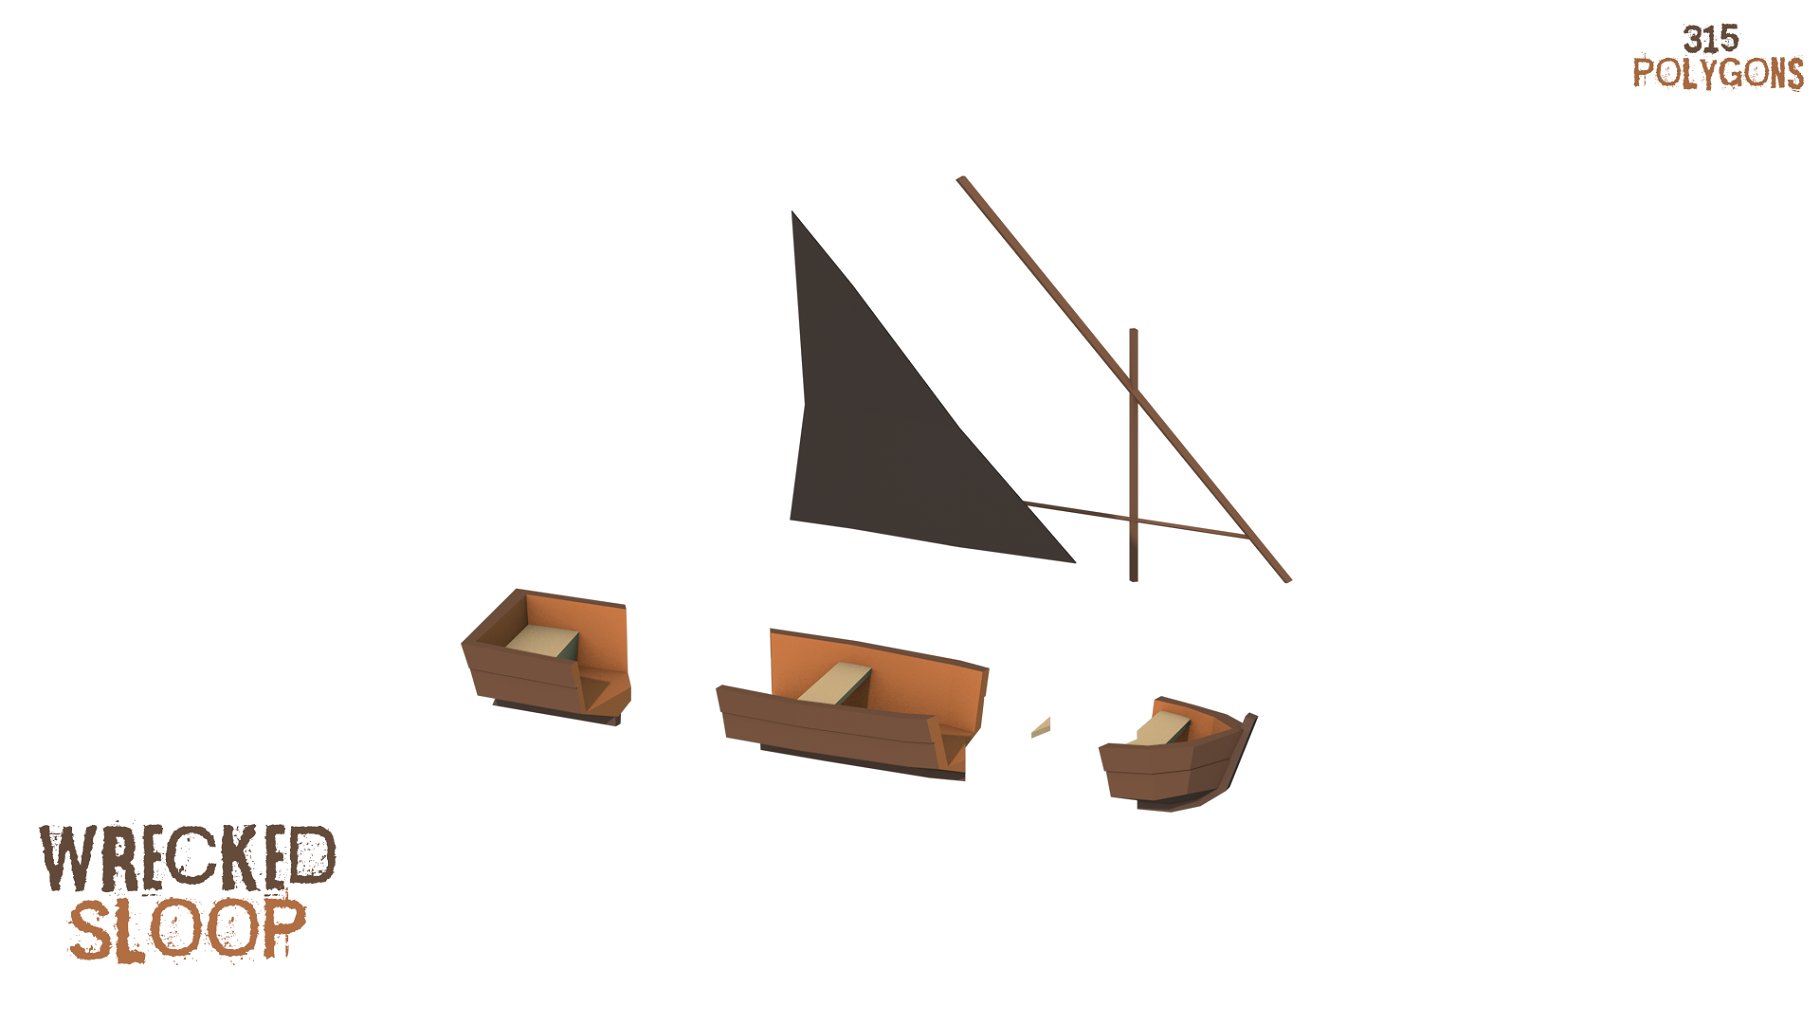 Mockup of wrecked sloop on a white background.